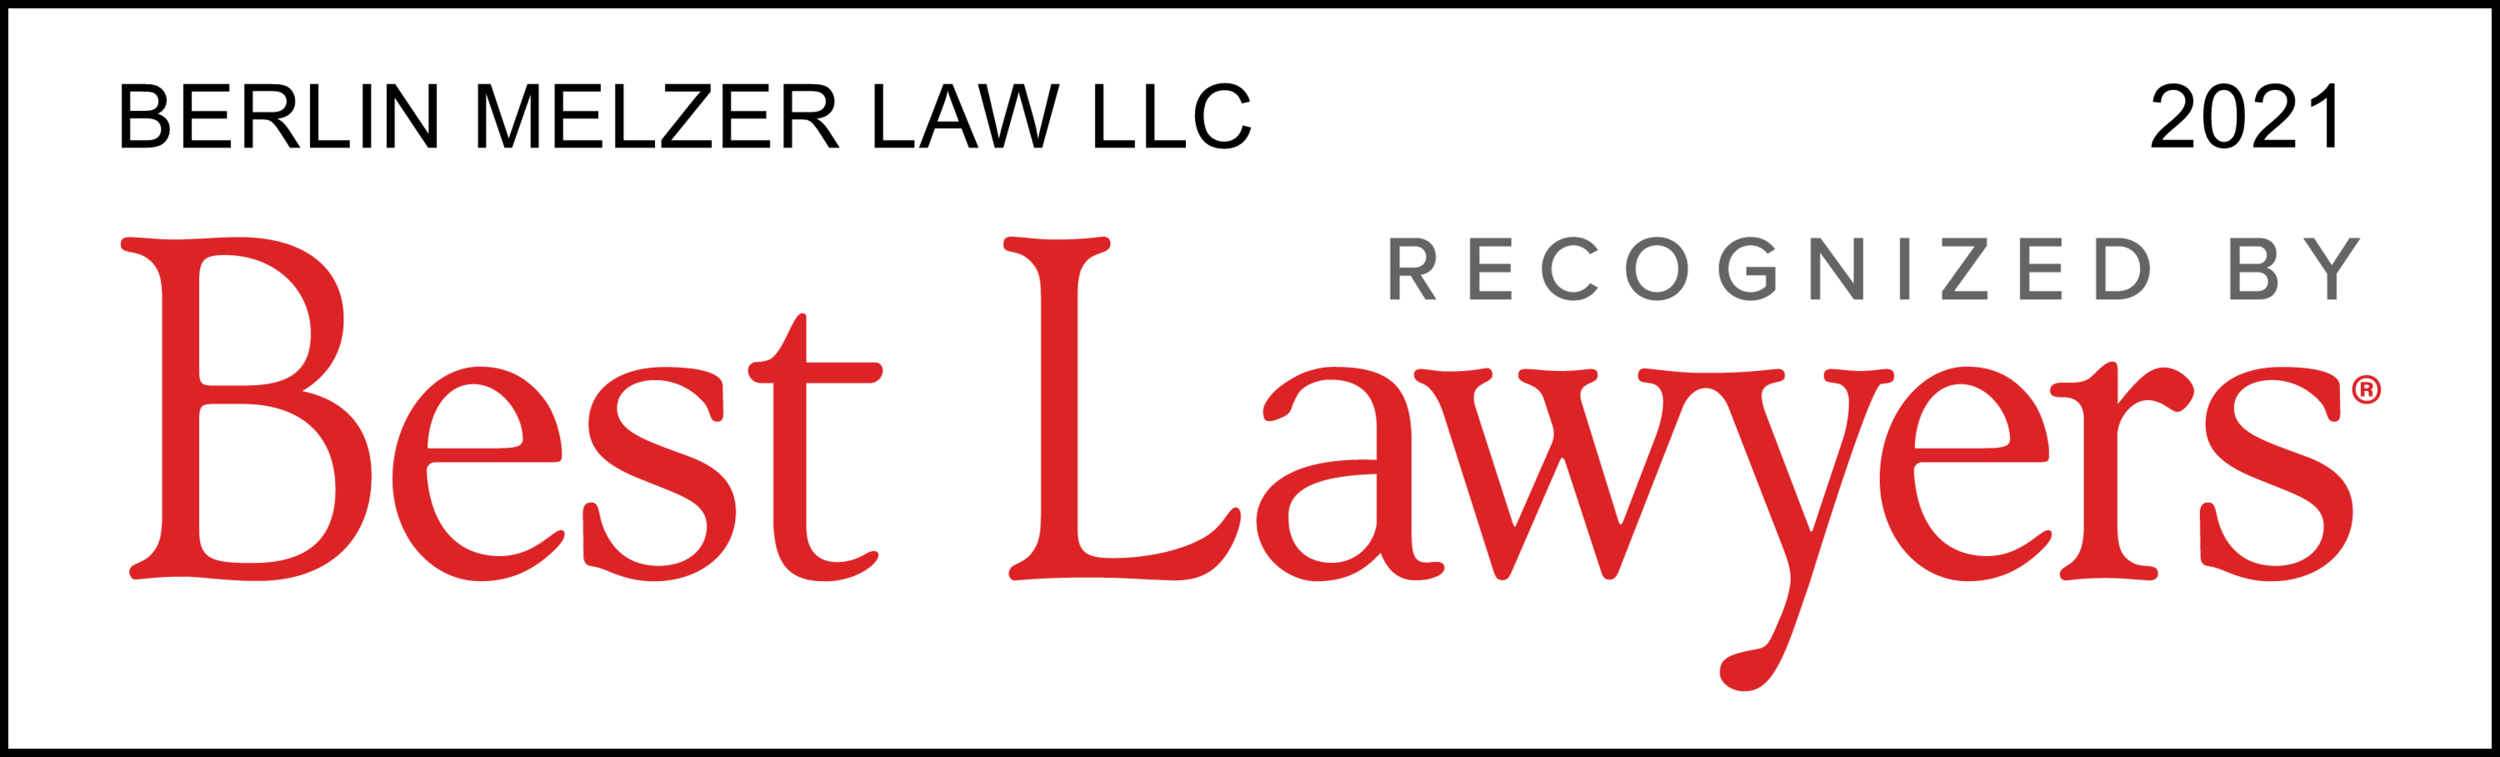 Best Lawyers - Firm Logo (1).png